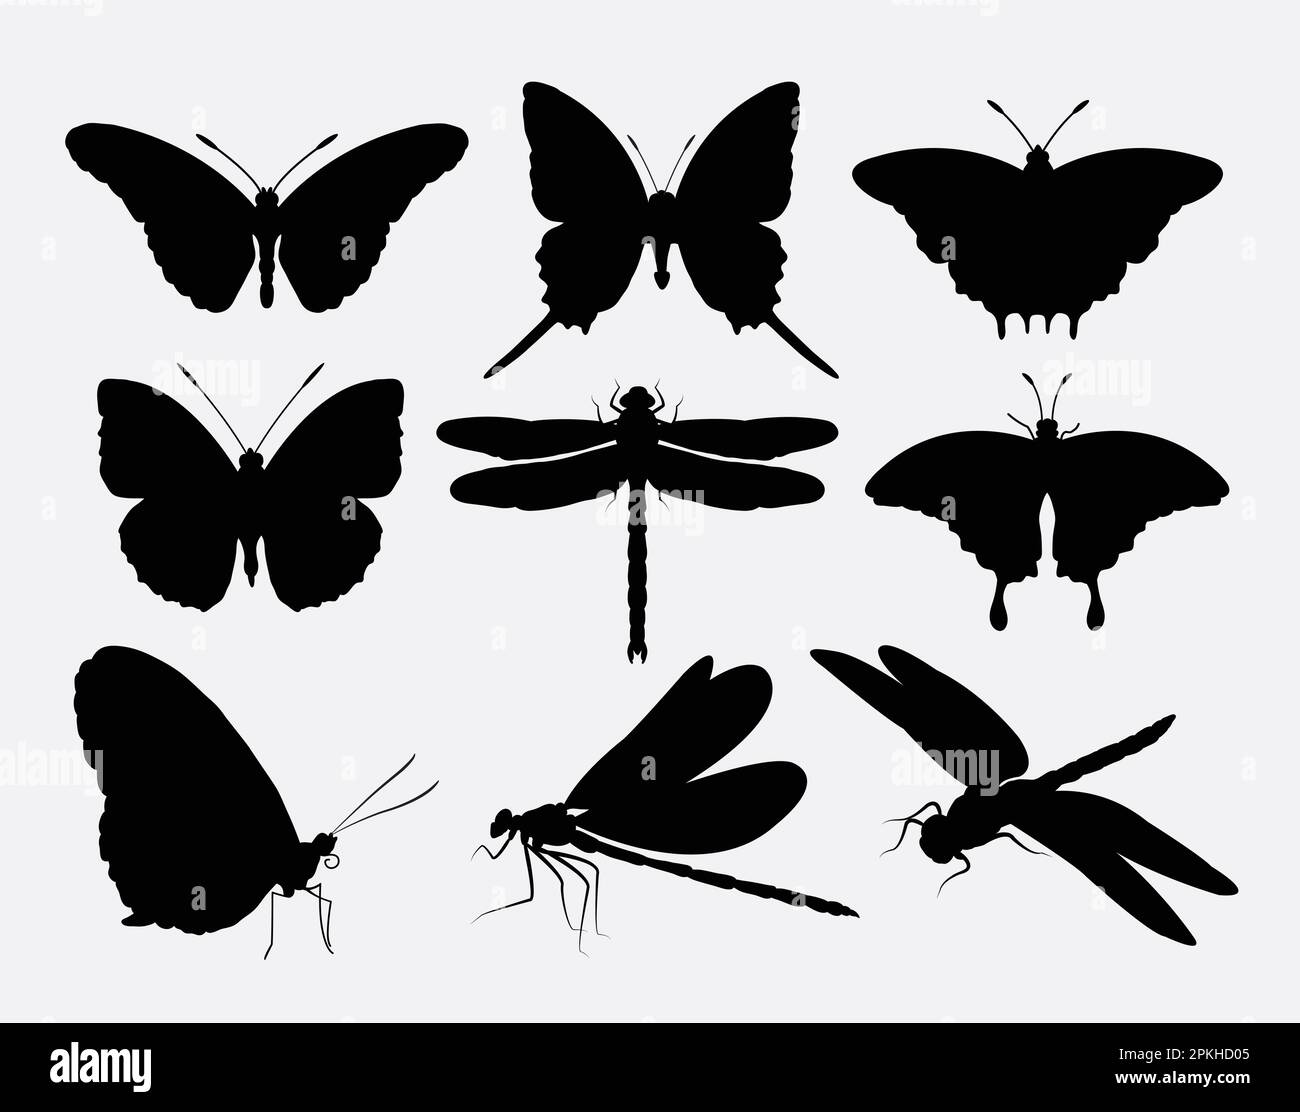 Butterfly and dragonfly insect silhouettes Stock Vector